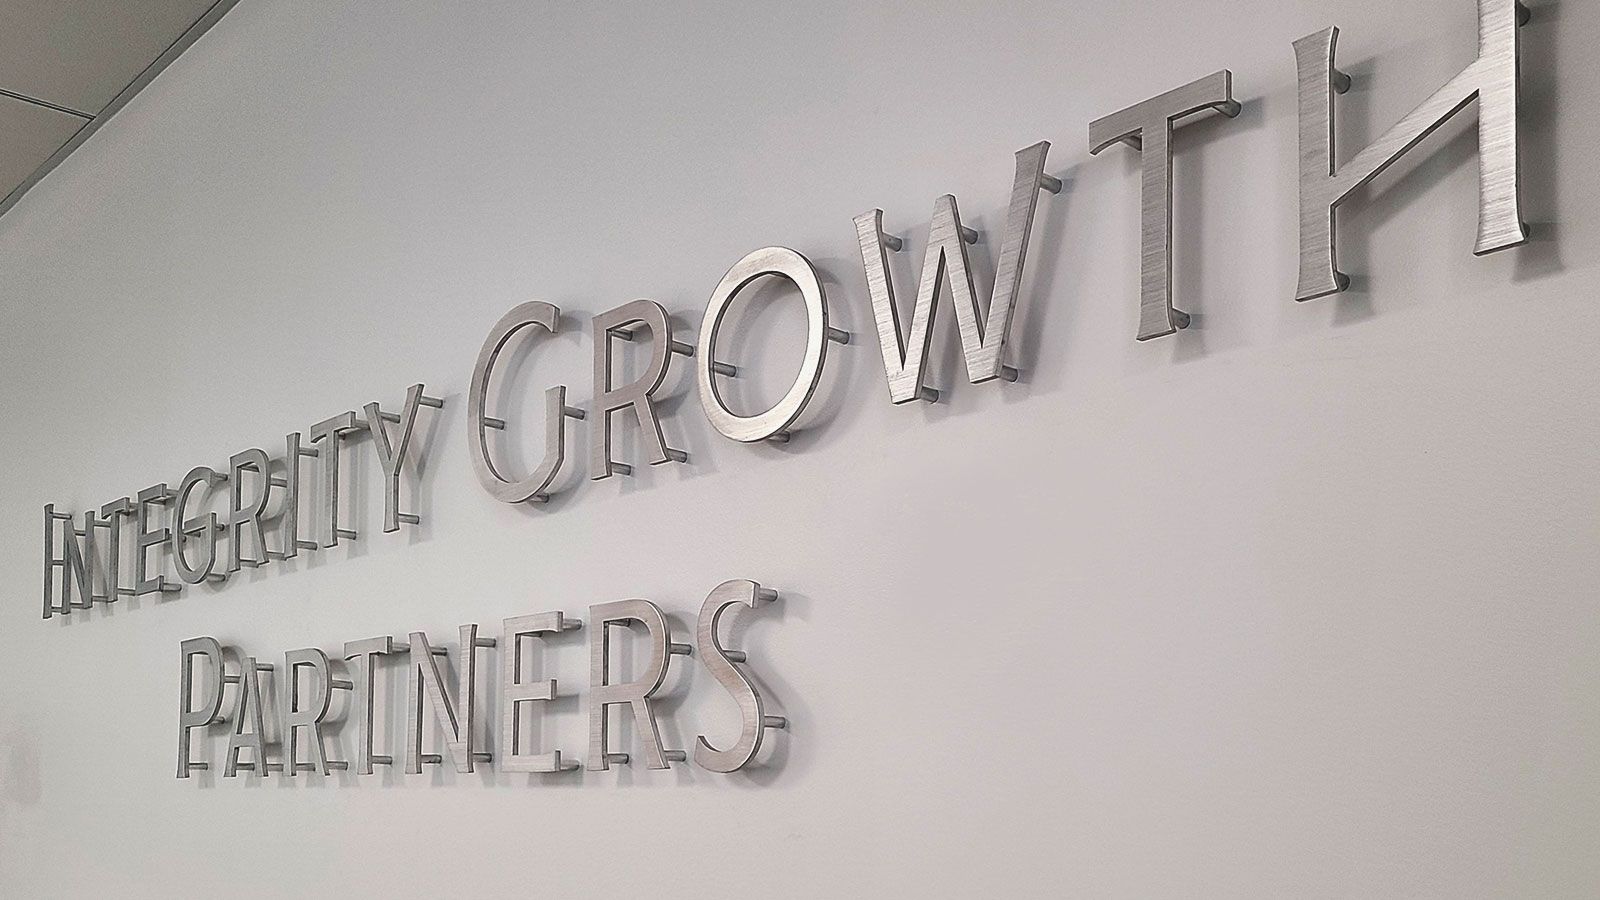 Integrity growth partners 3D sign